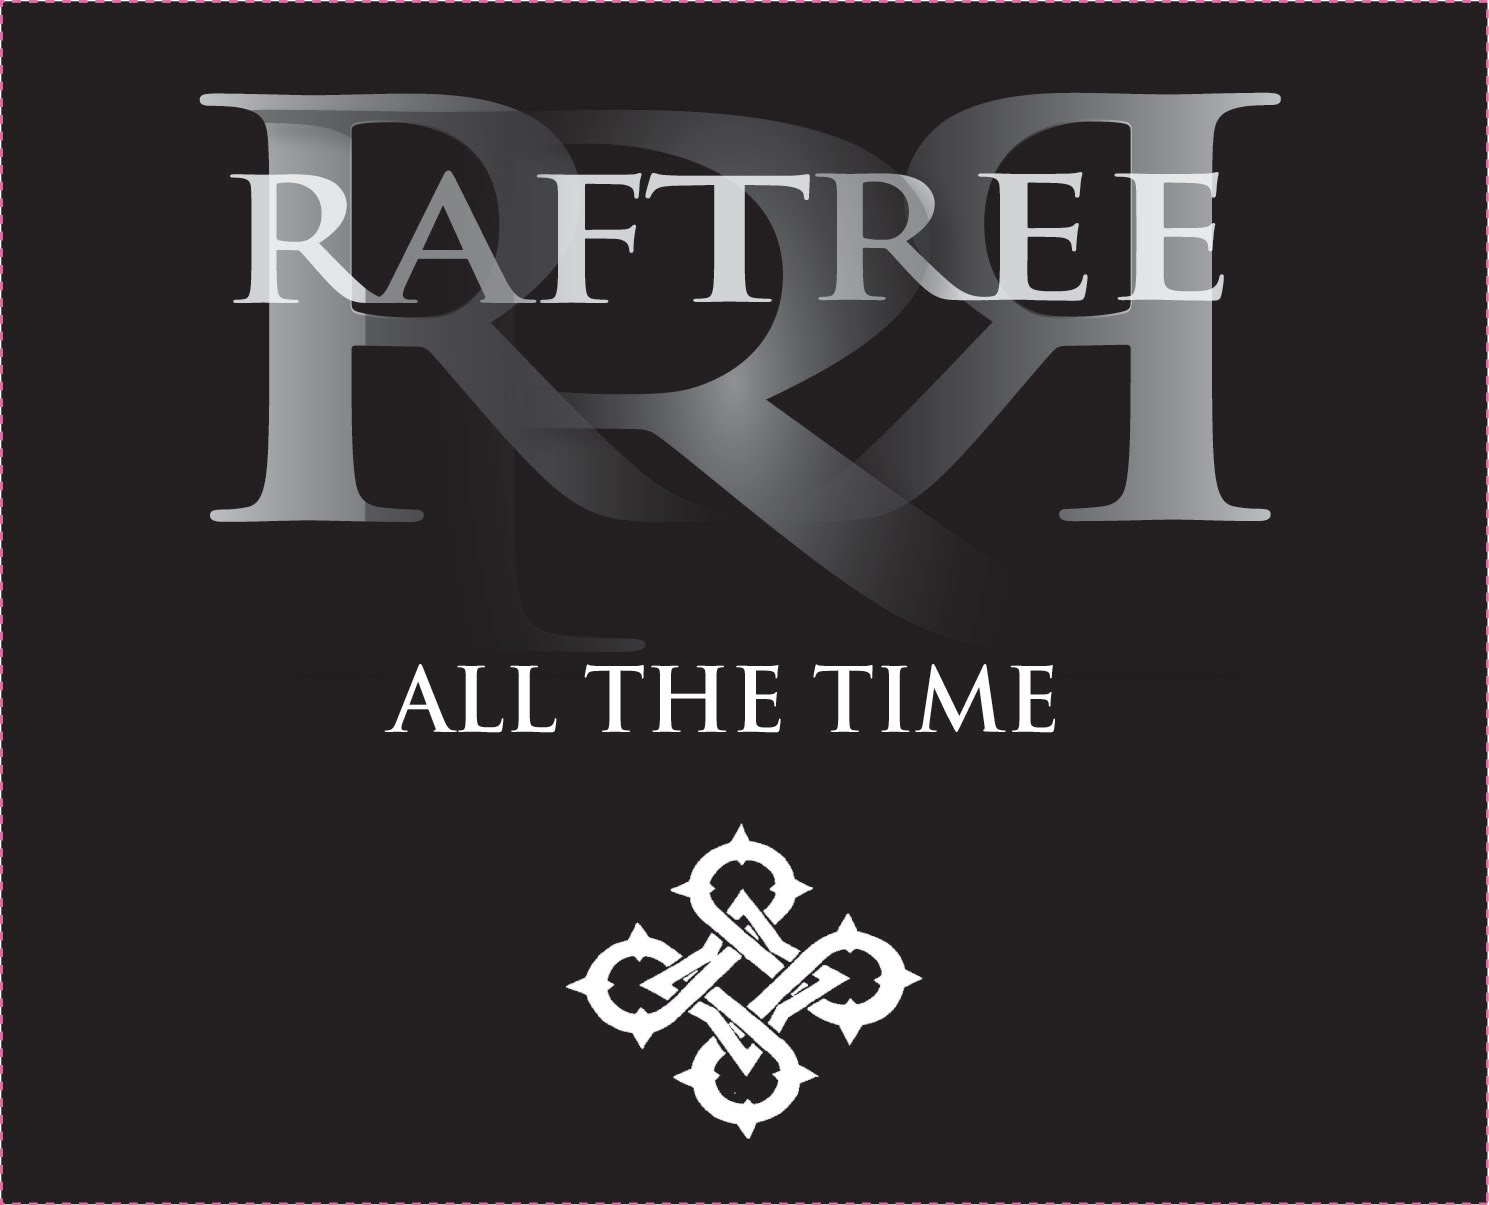 Raftree “All The Time”